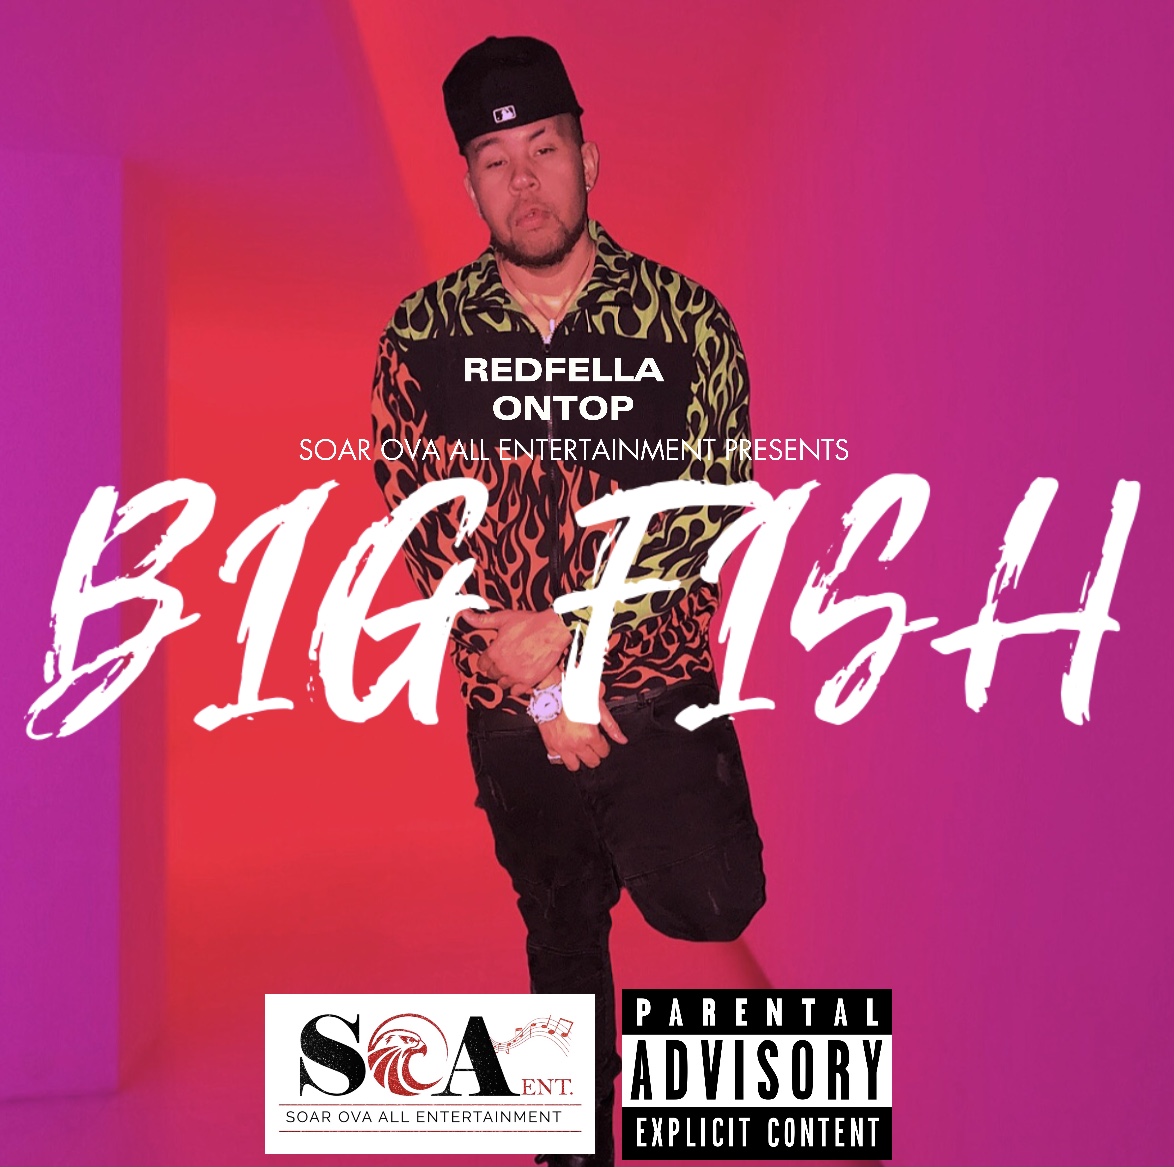 Big Fish (The Mixtape) by RedFellaOnTop is Dropping On All Digital Streaming Platforms May 1st 2021